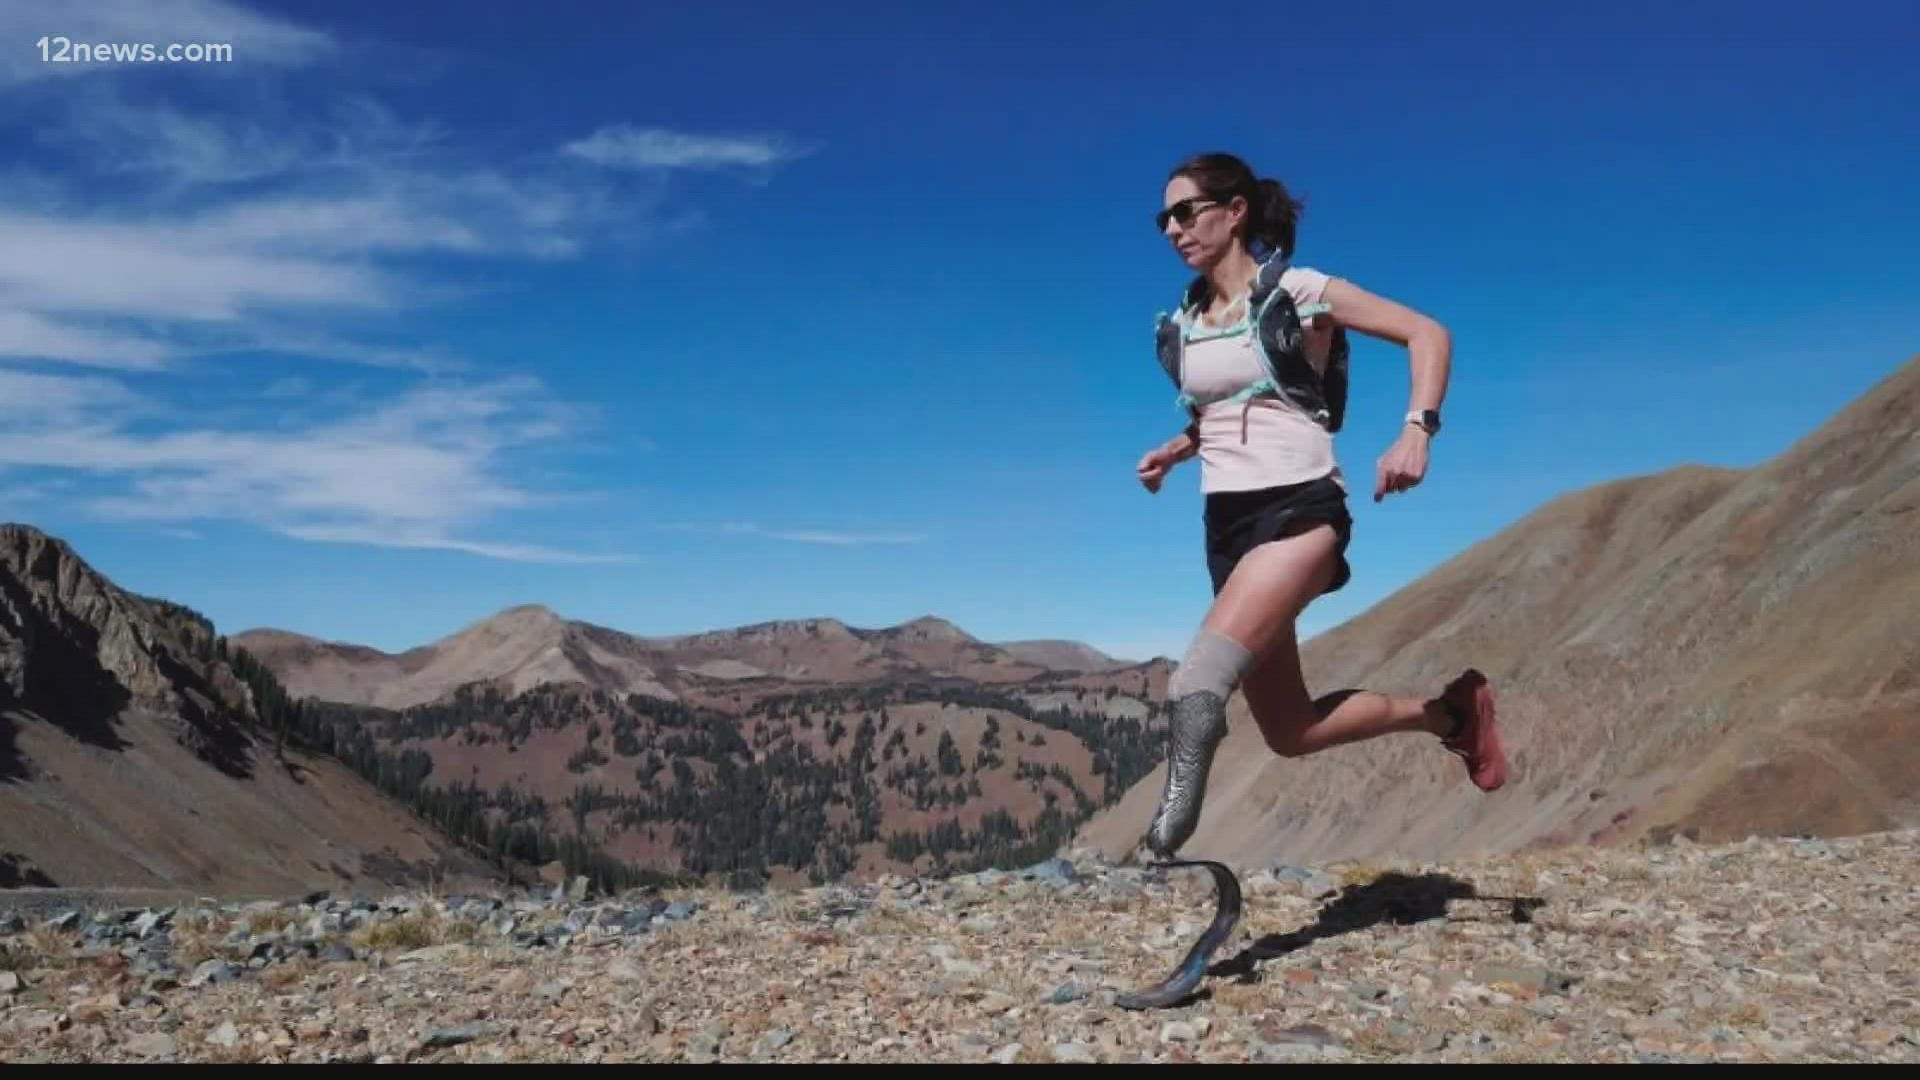 Jacky Hunt Broshma’s dream is nearing reality as she hopes to be the first-ever amputee to complete the Moab 240 Endurance Run.